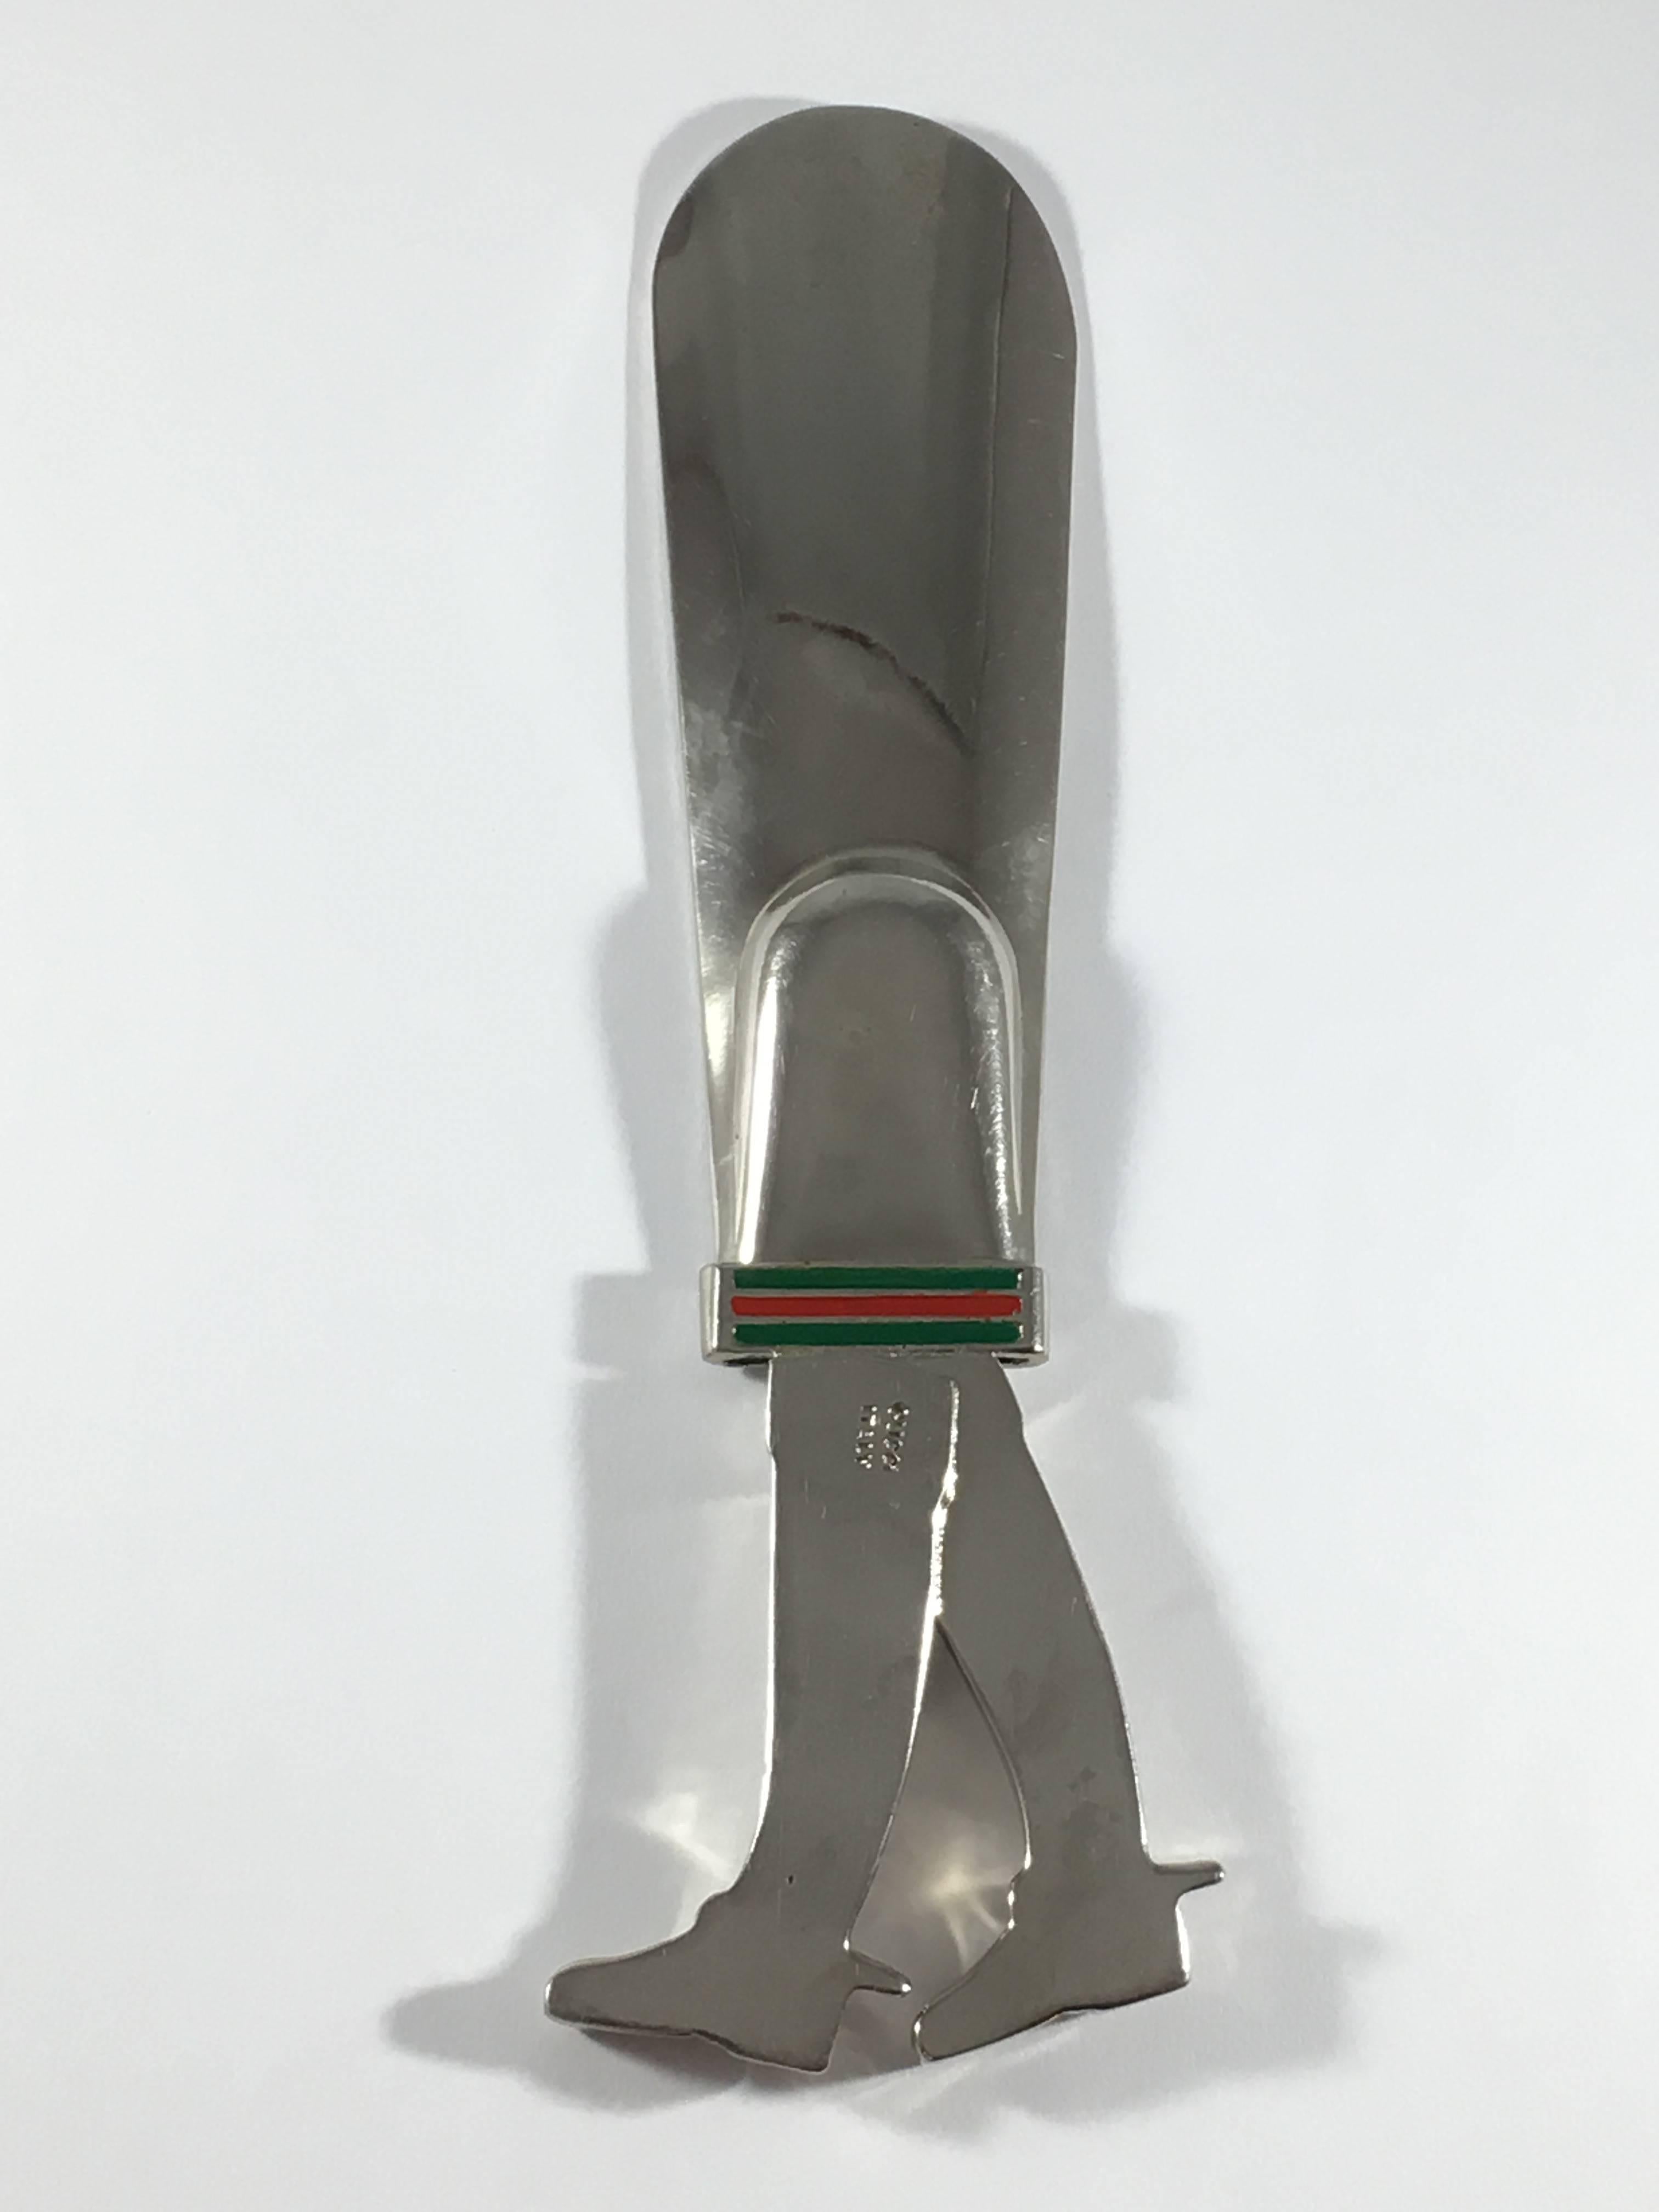 This is a 1970s Gucci shoe horn with equestrian boots and red and green enamel stripes. It is made out of silver-tone metal and features equestrian boots and red and green enamel stripes. It is in very good condition with slight wear to the finish